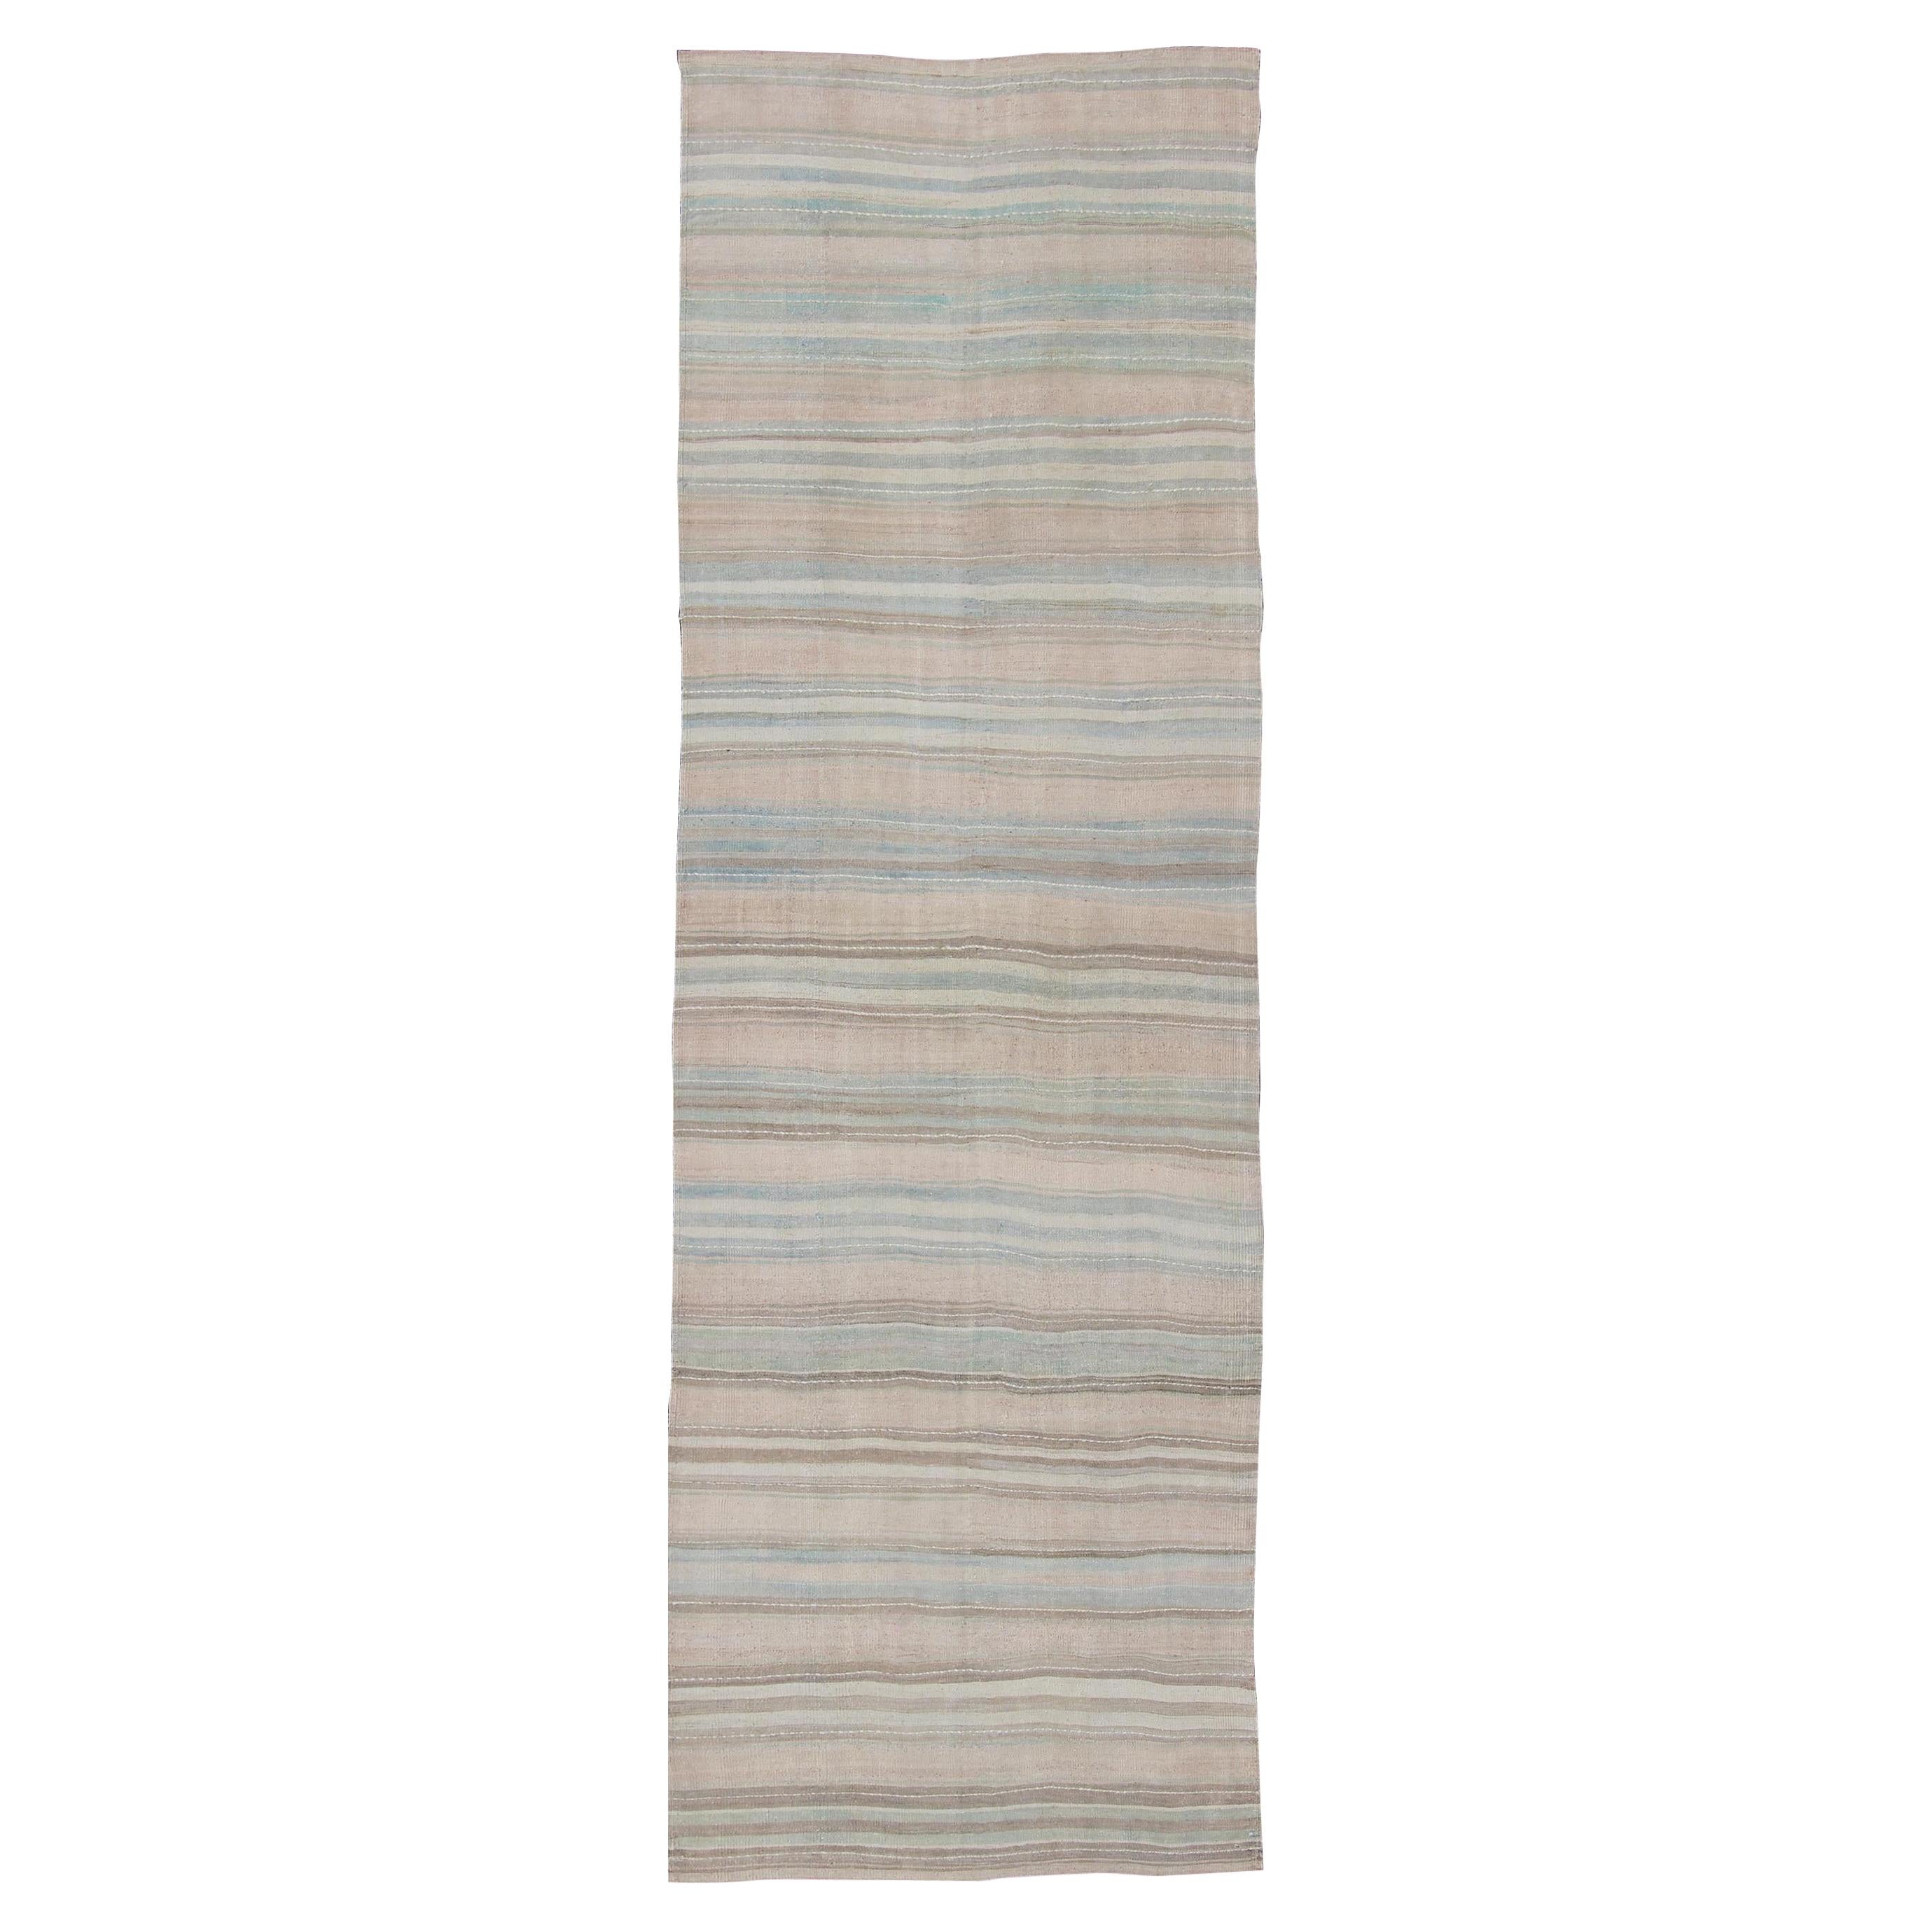 Striped Flat-Weave Vintage Turkish Kilim Wide Runner with Light Colors For Sale